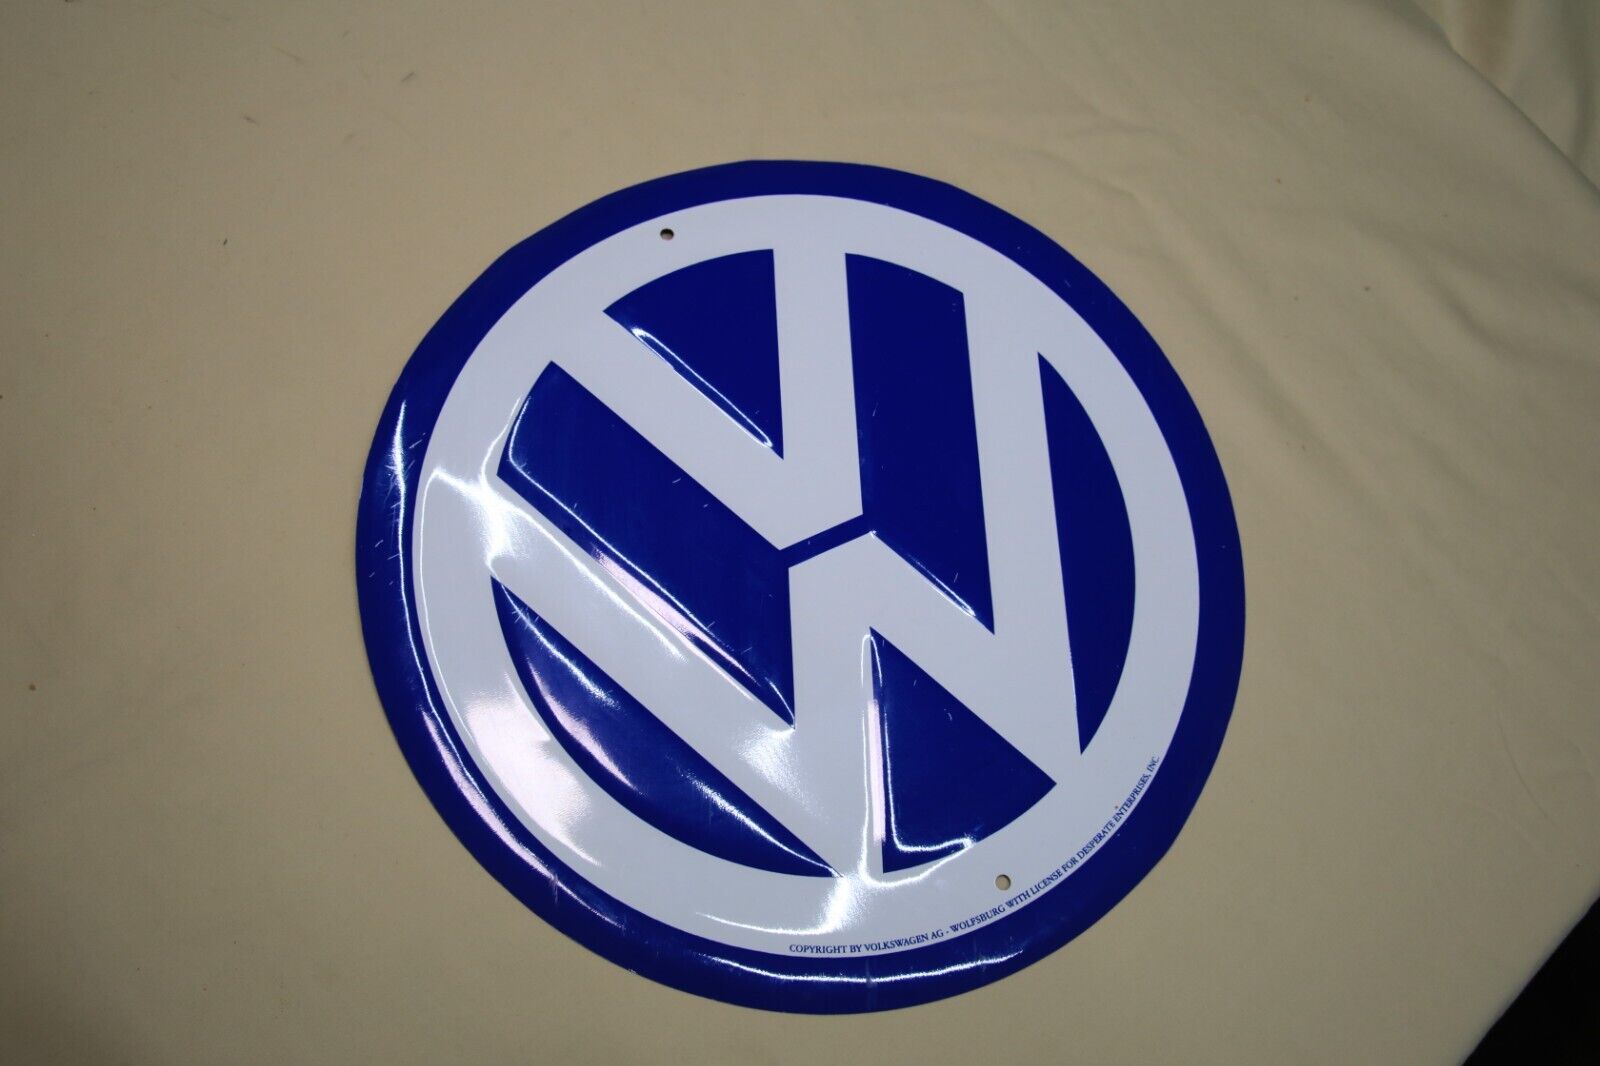 VW blue and white 11 1/2 inch diameter painted sign